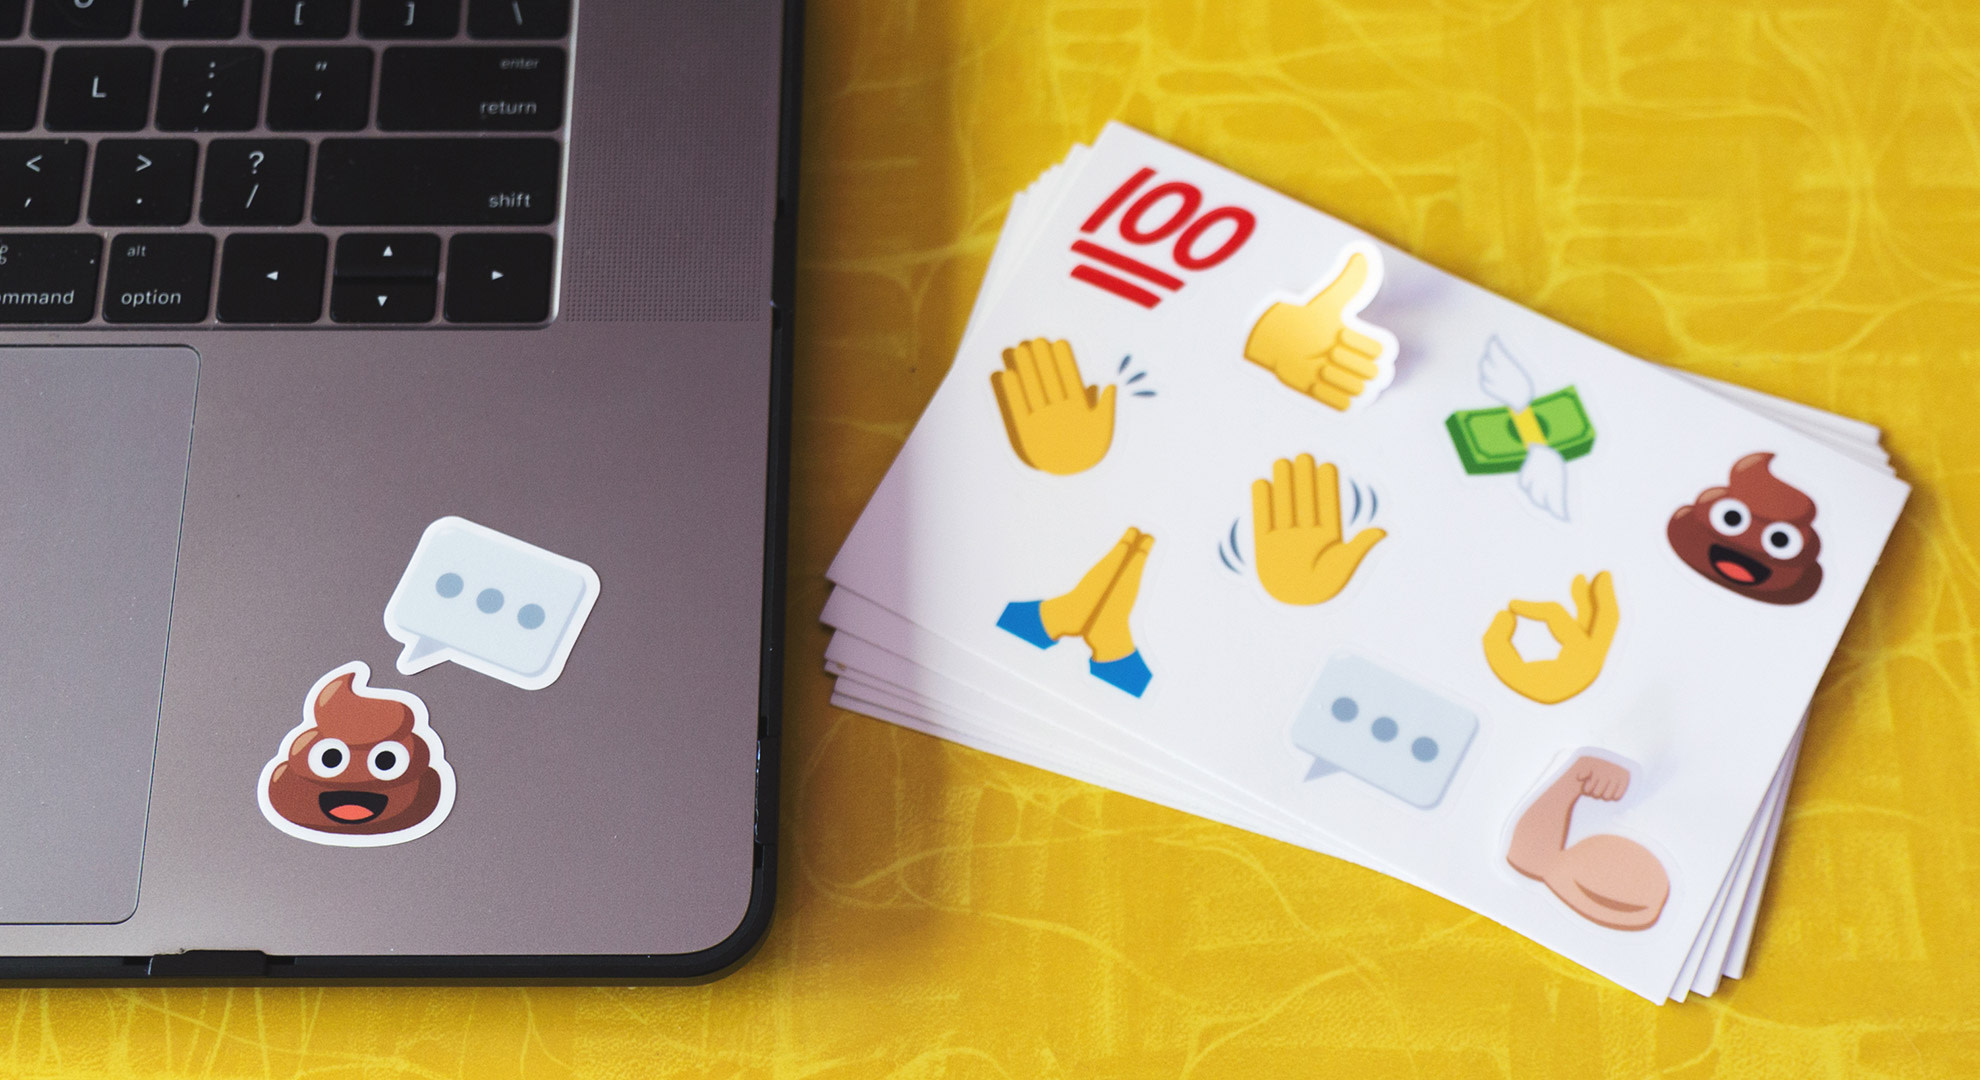 Affordable emoji stickers For Sale, Stationery & School Supplies